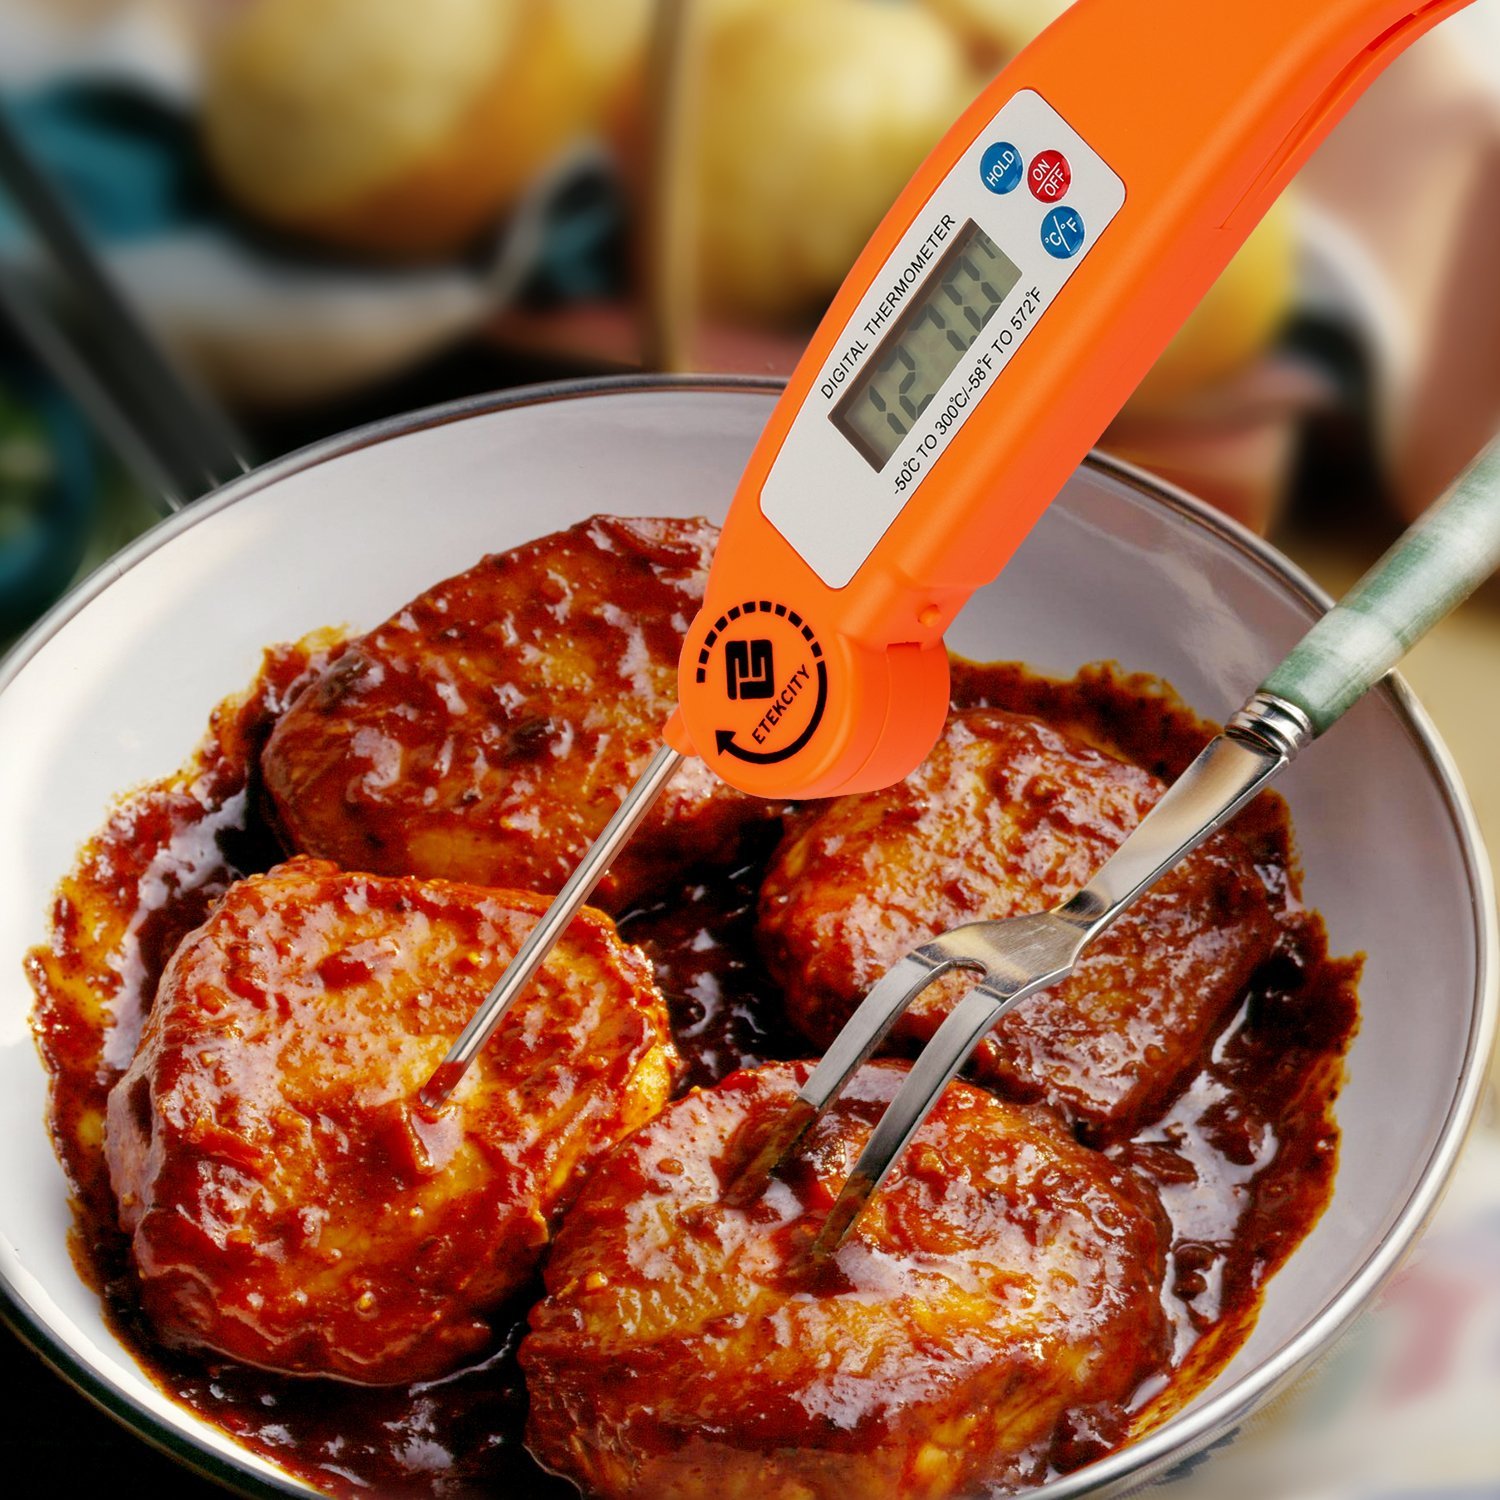 https://9to5toys.com/wp-content/uploads/sites/5/2016/02/digital-bbq-grillcooking-thermometer-1.jpg